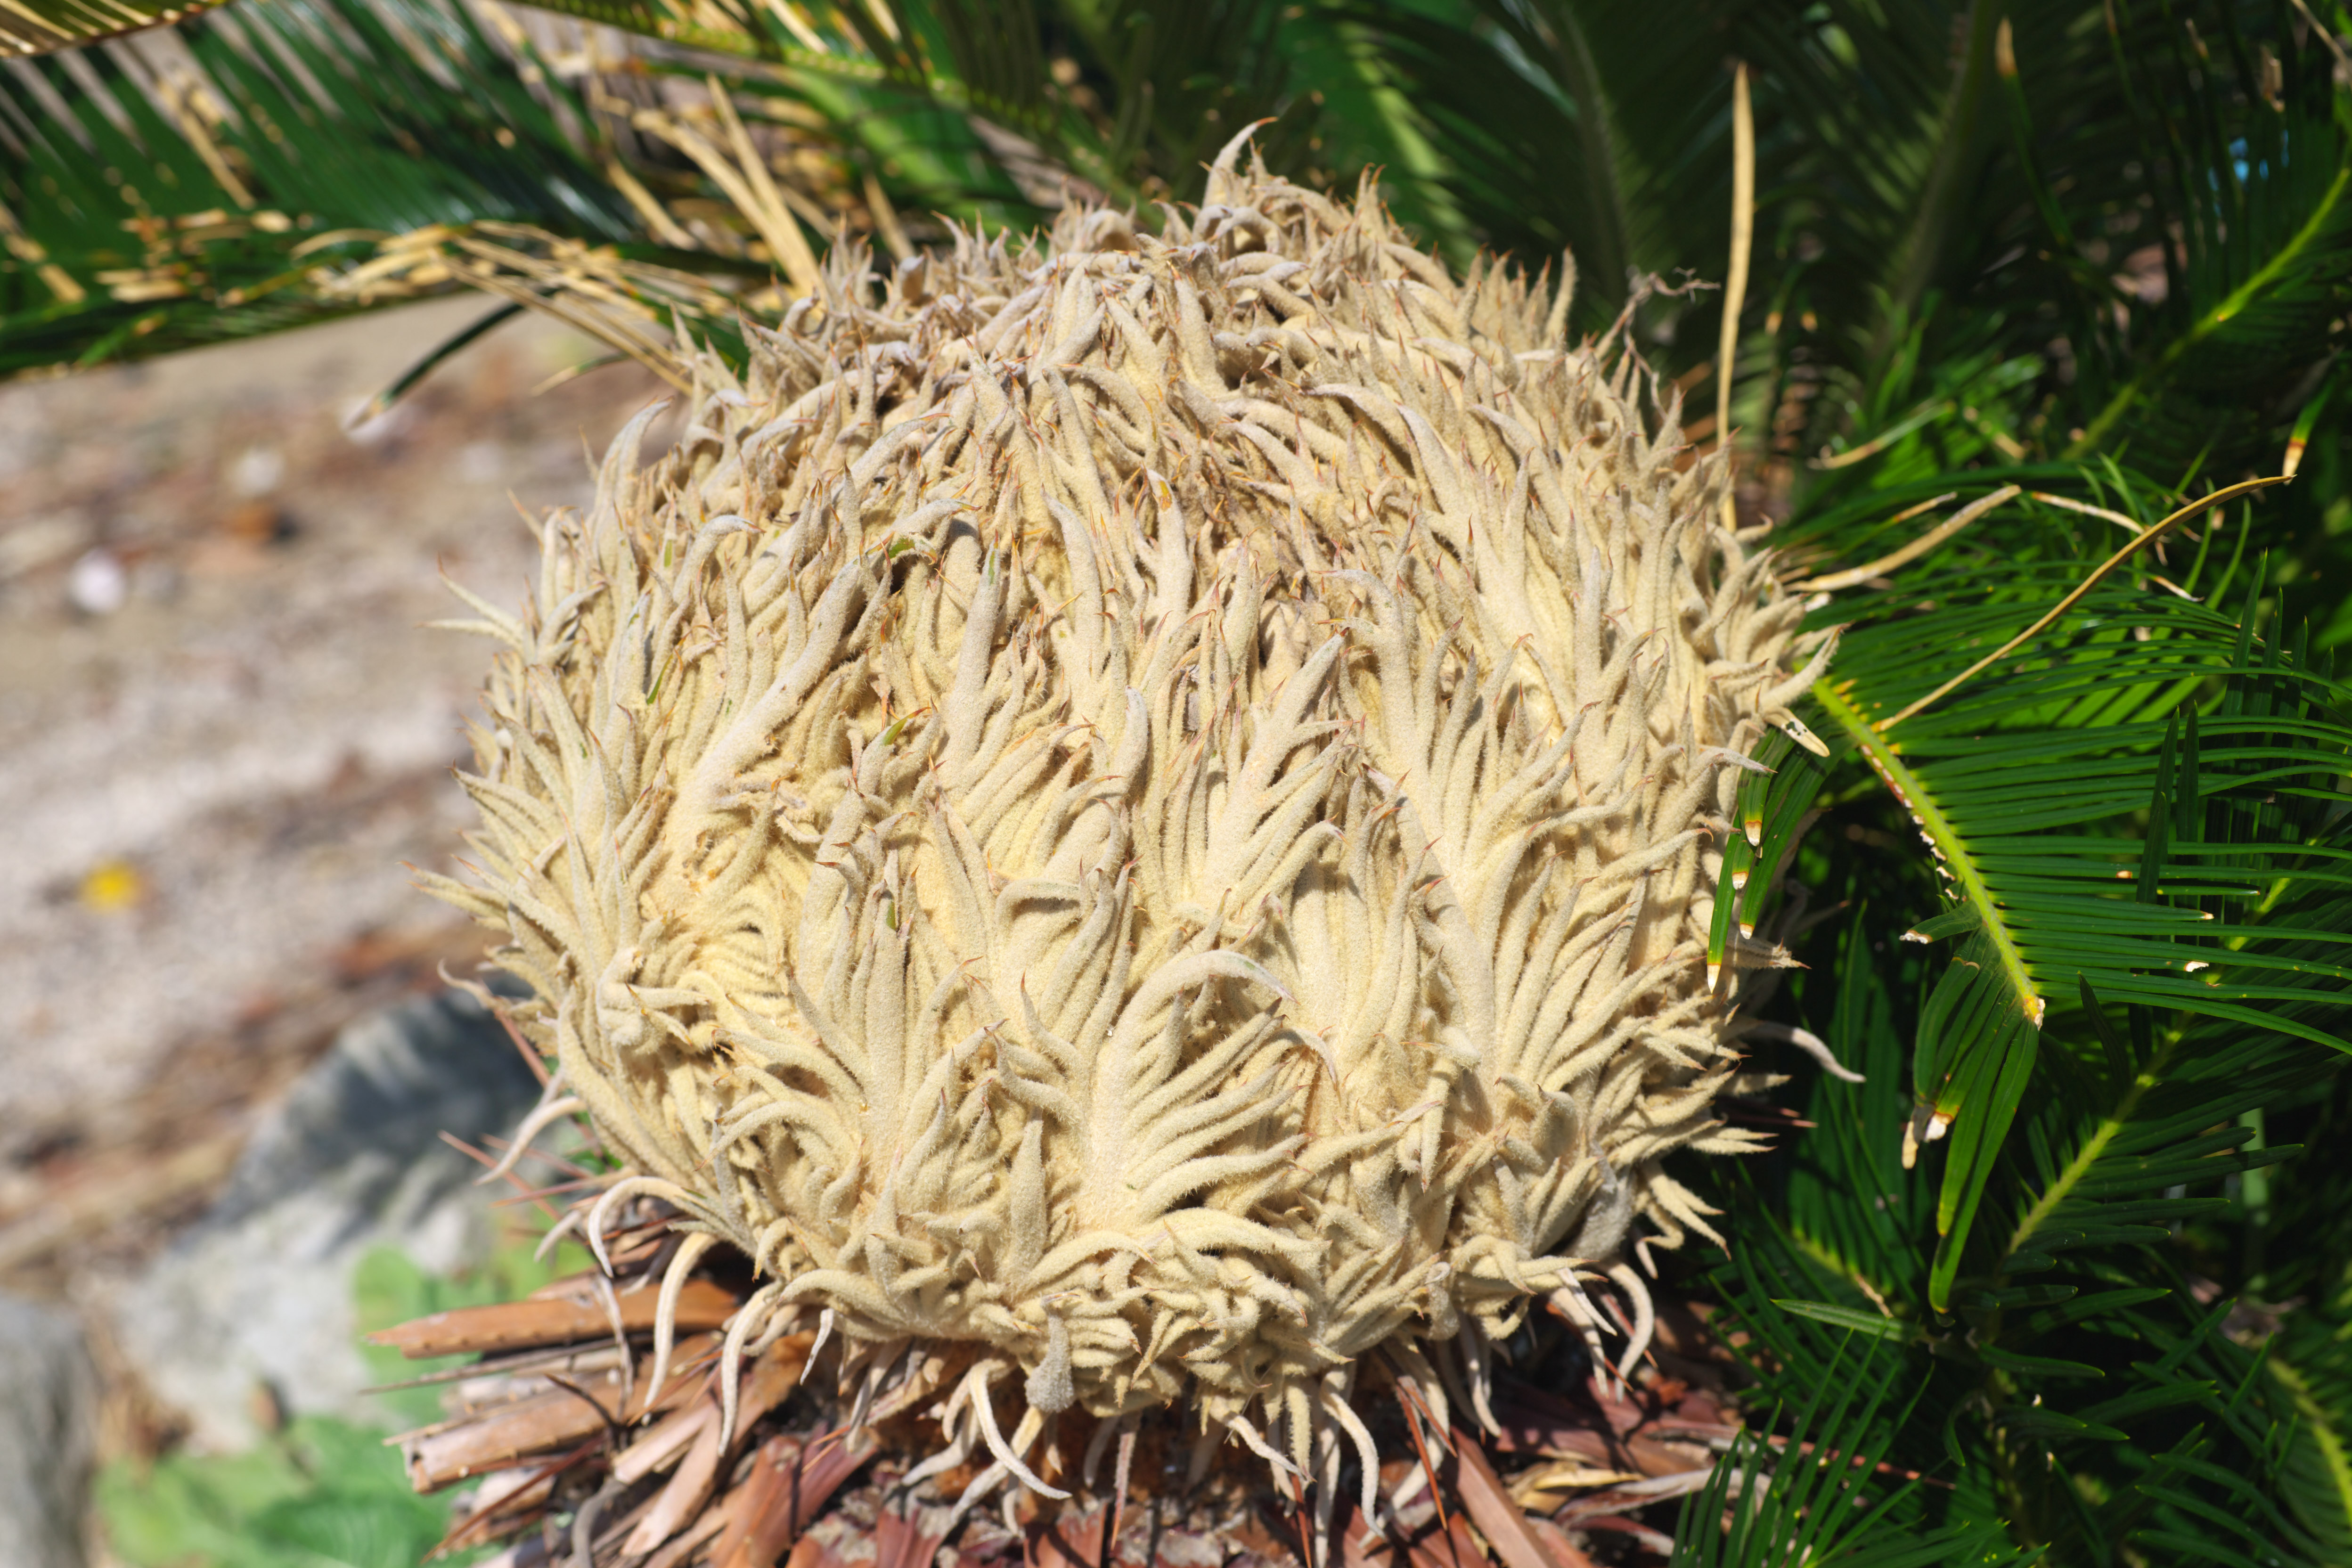 photo,material,free,landscape,picture,stock photo,Creative Commons,A cycad ball, Cycad, , southern country plant, 